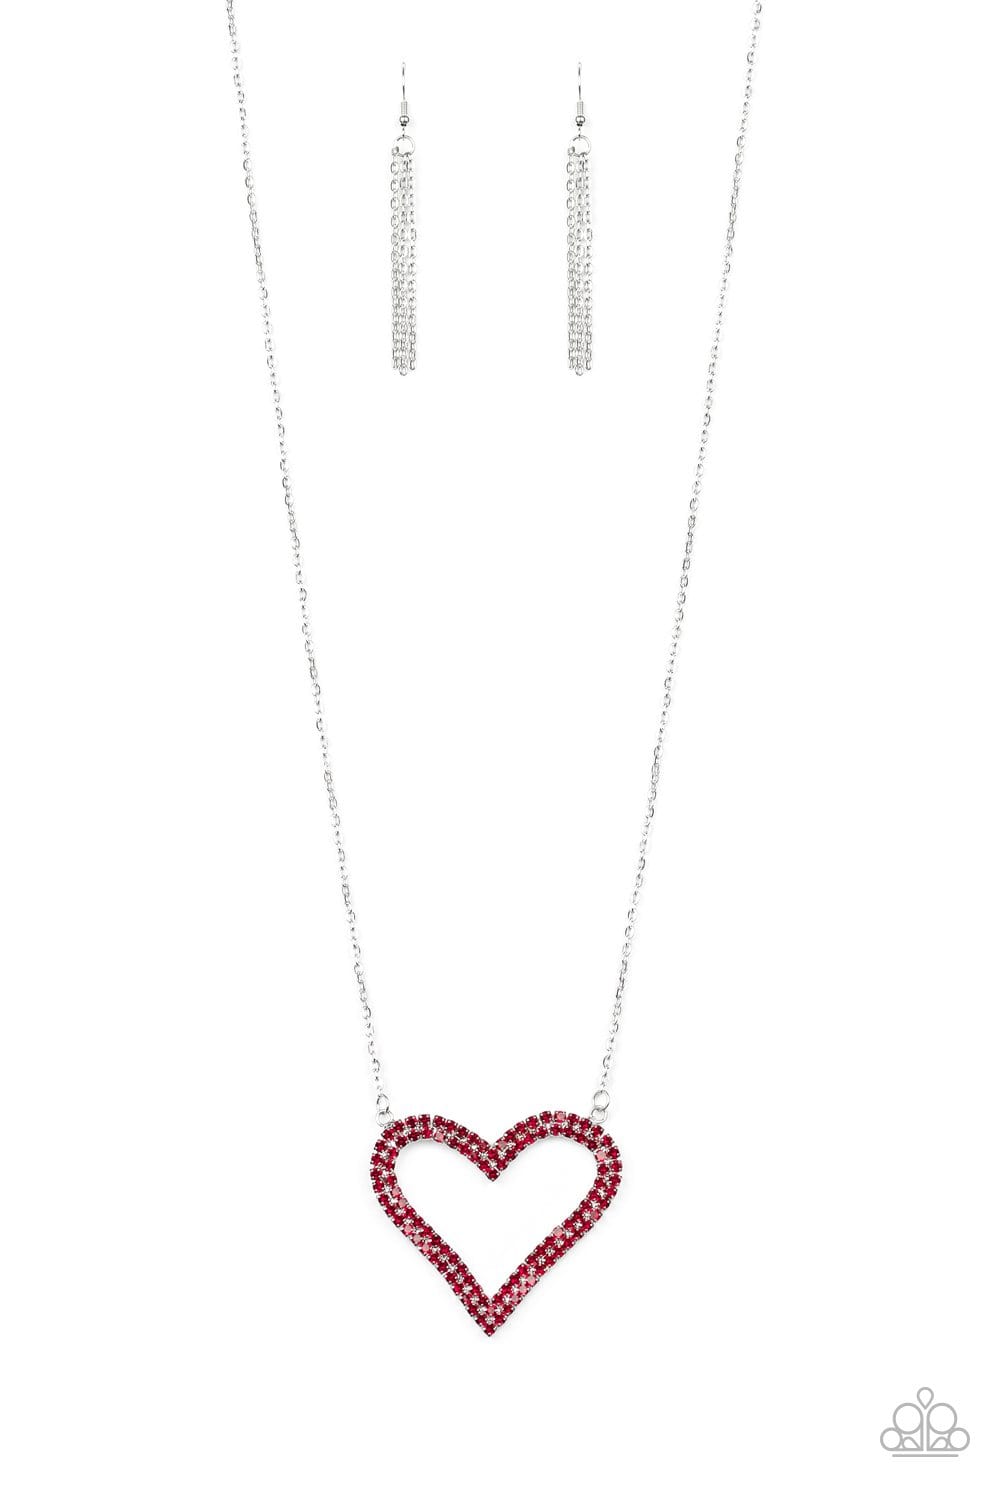 Paparazzi Pull Some HEART-strings Heart Necklaces